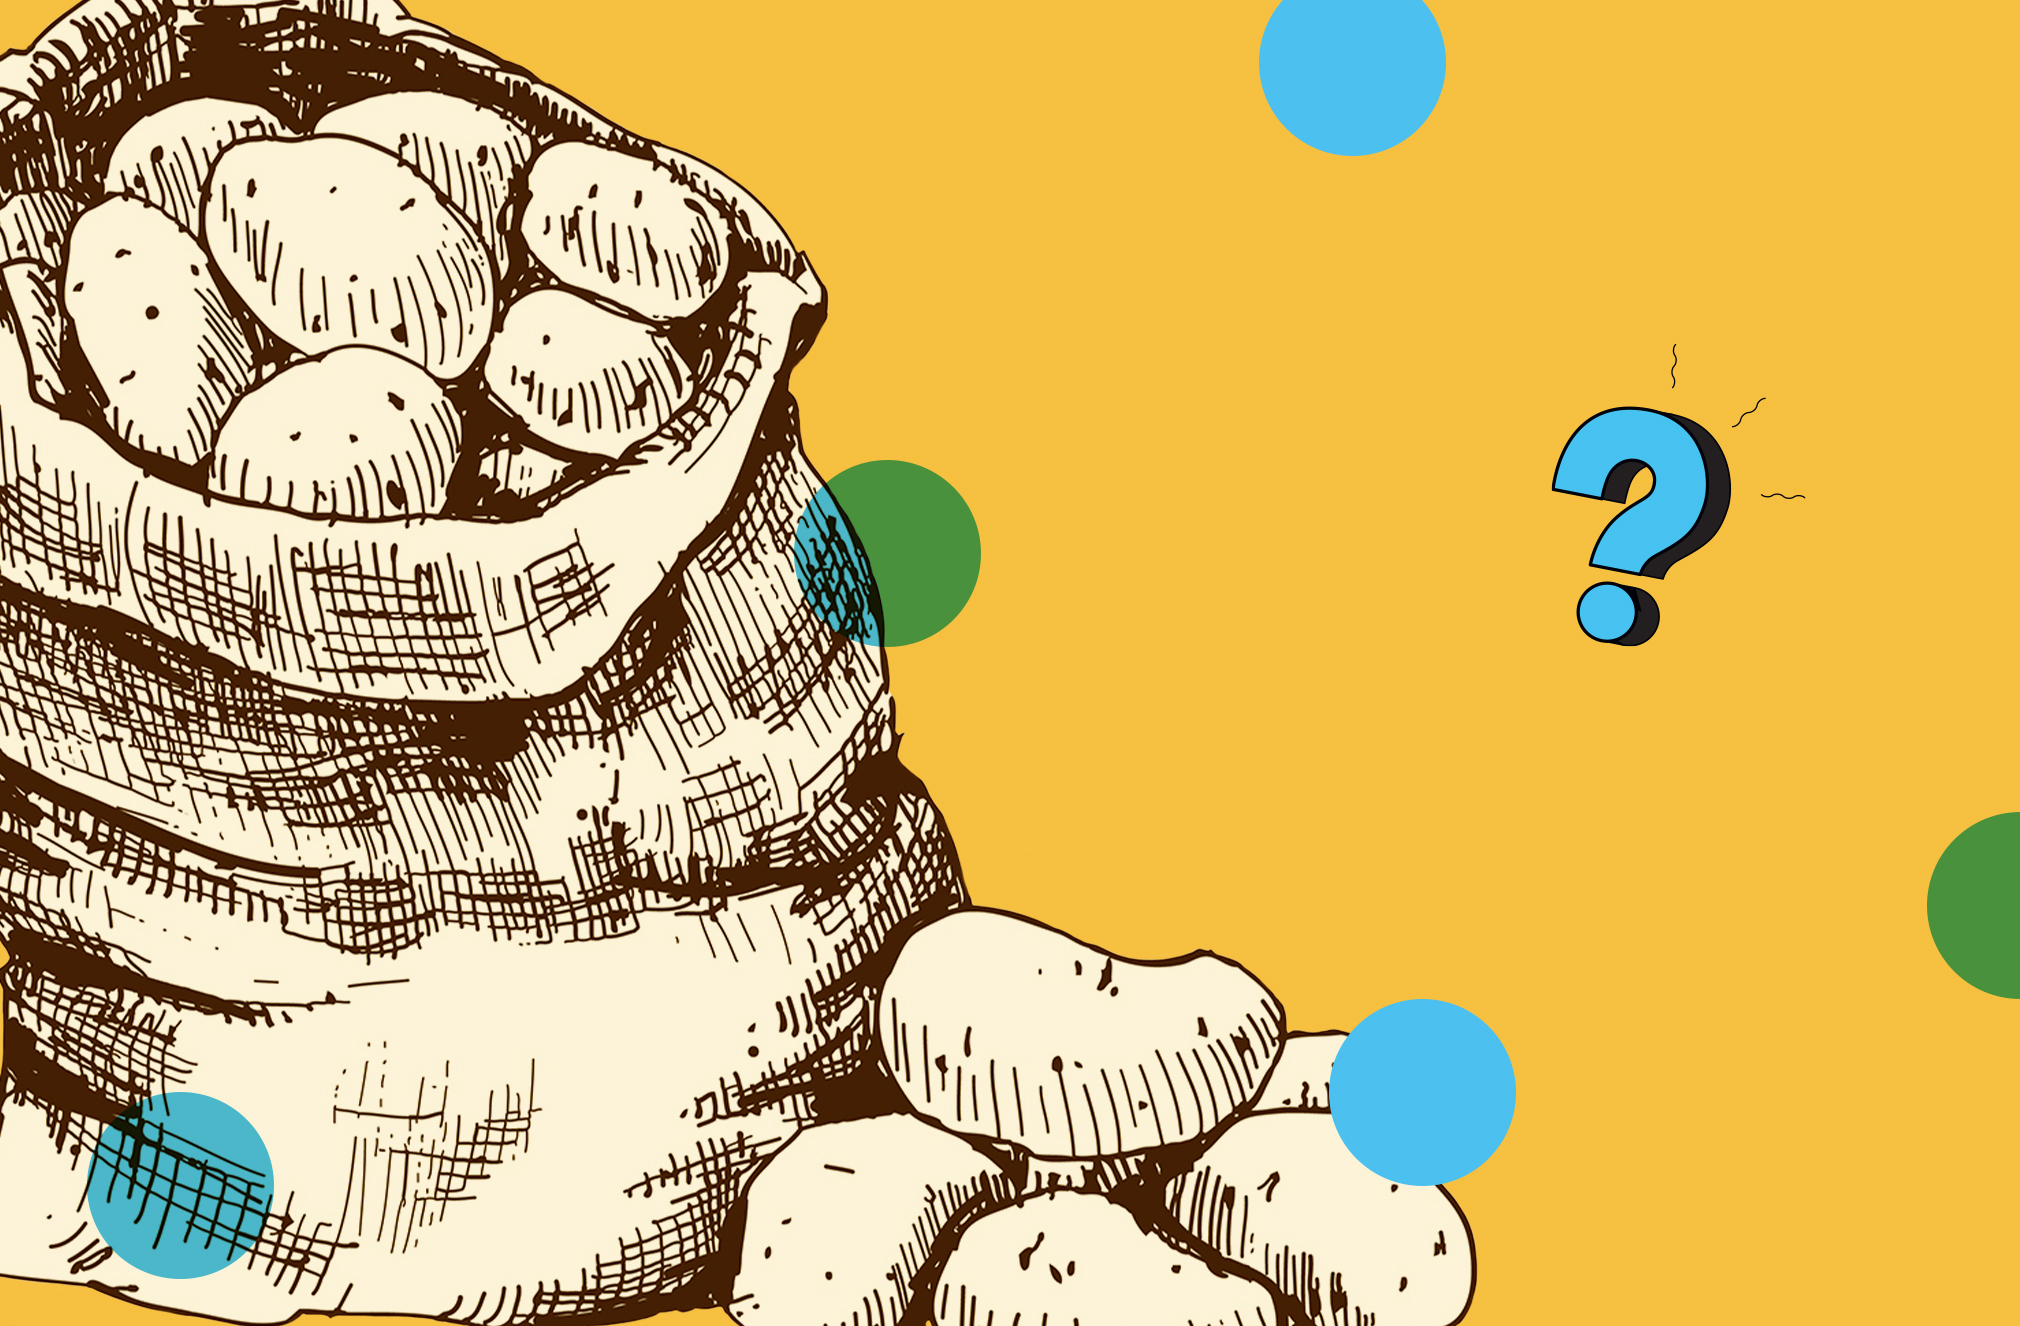 The Ask Us Anything logo with an illustrated heap of potatoes.